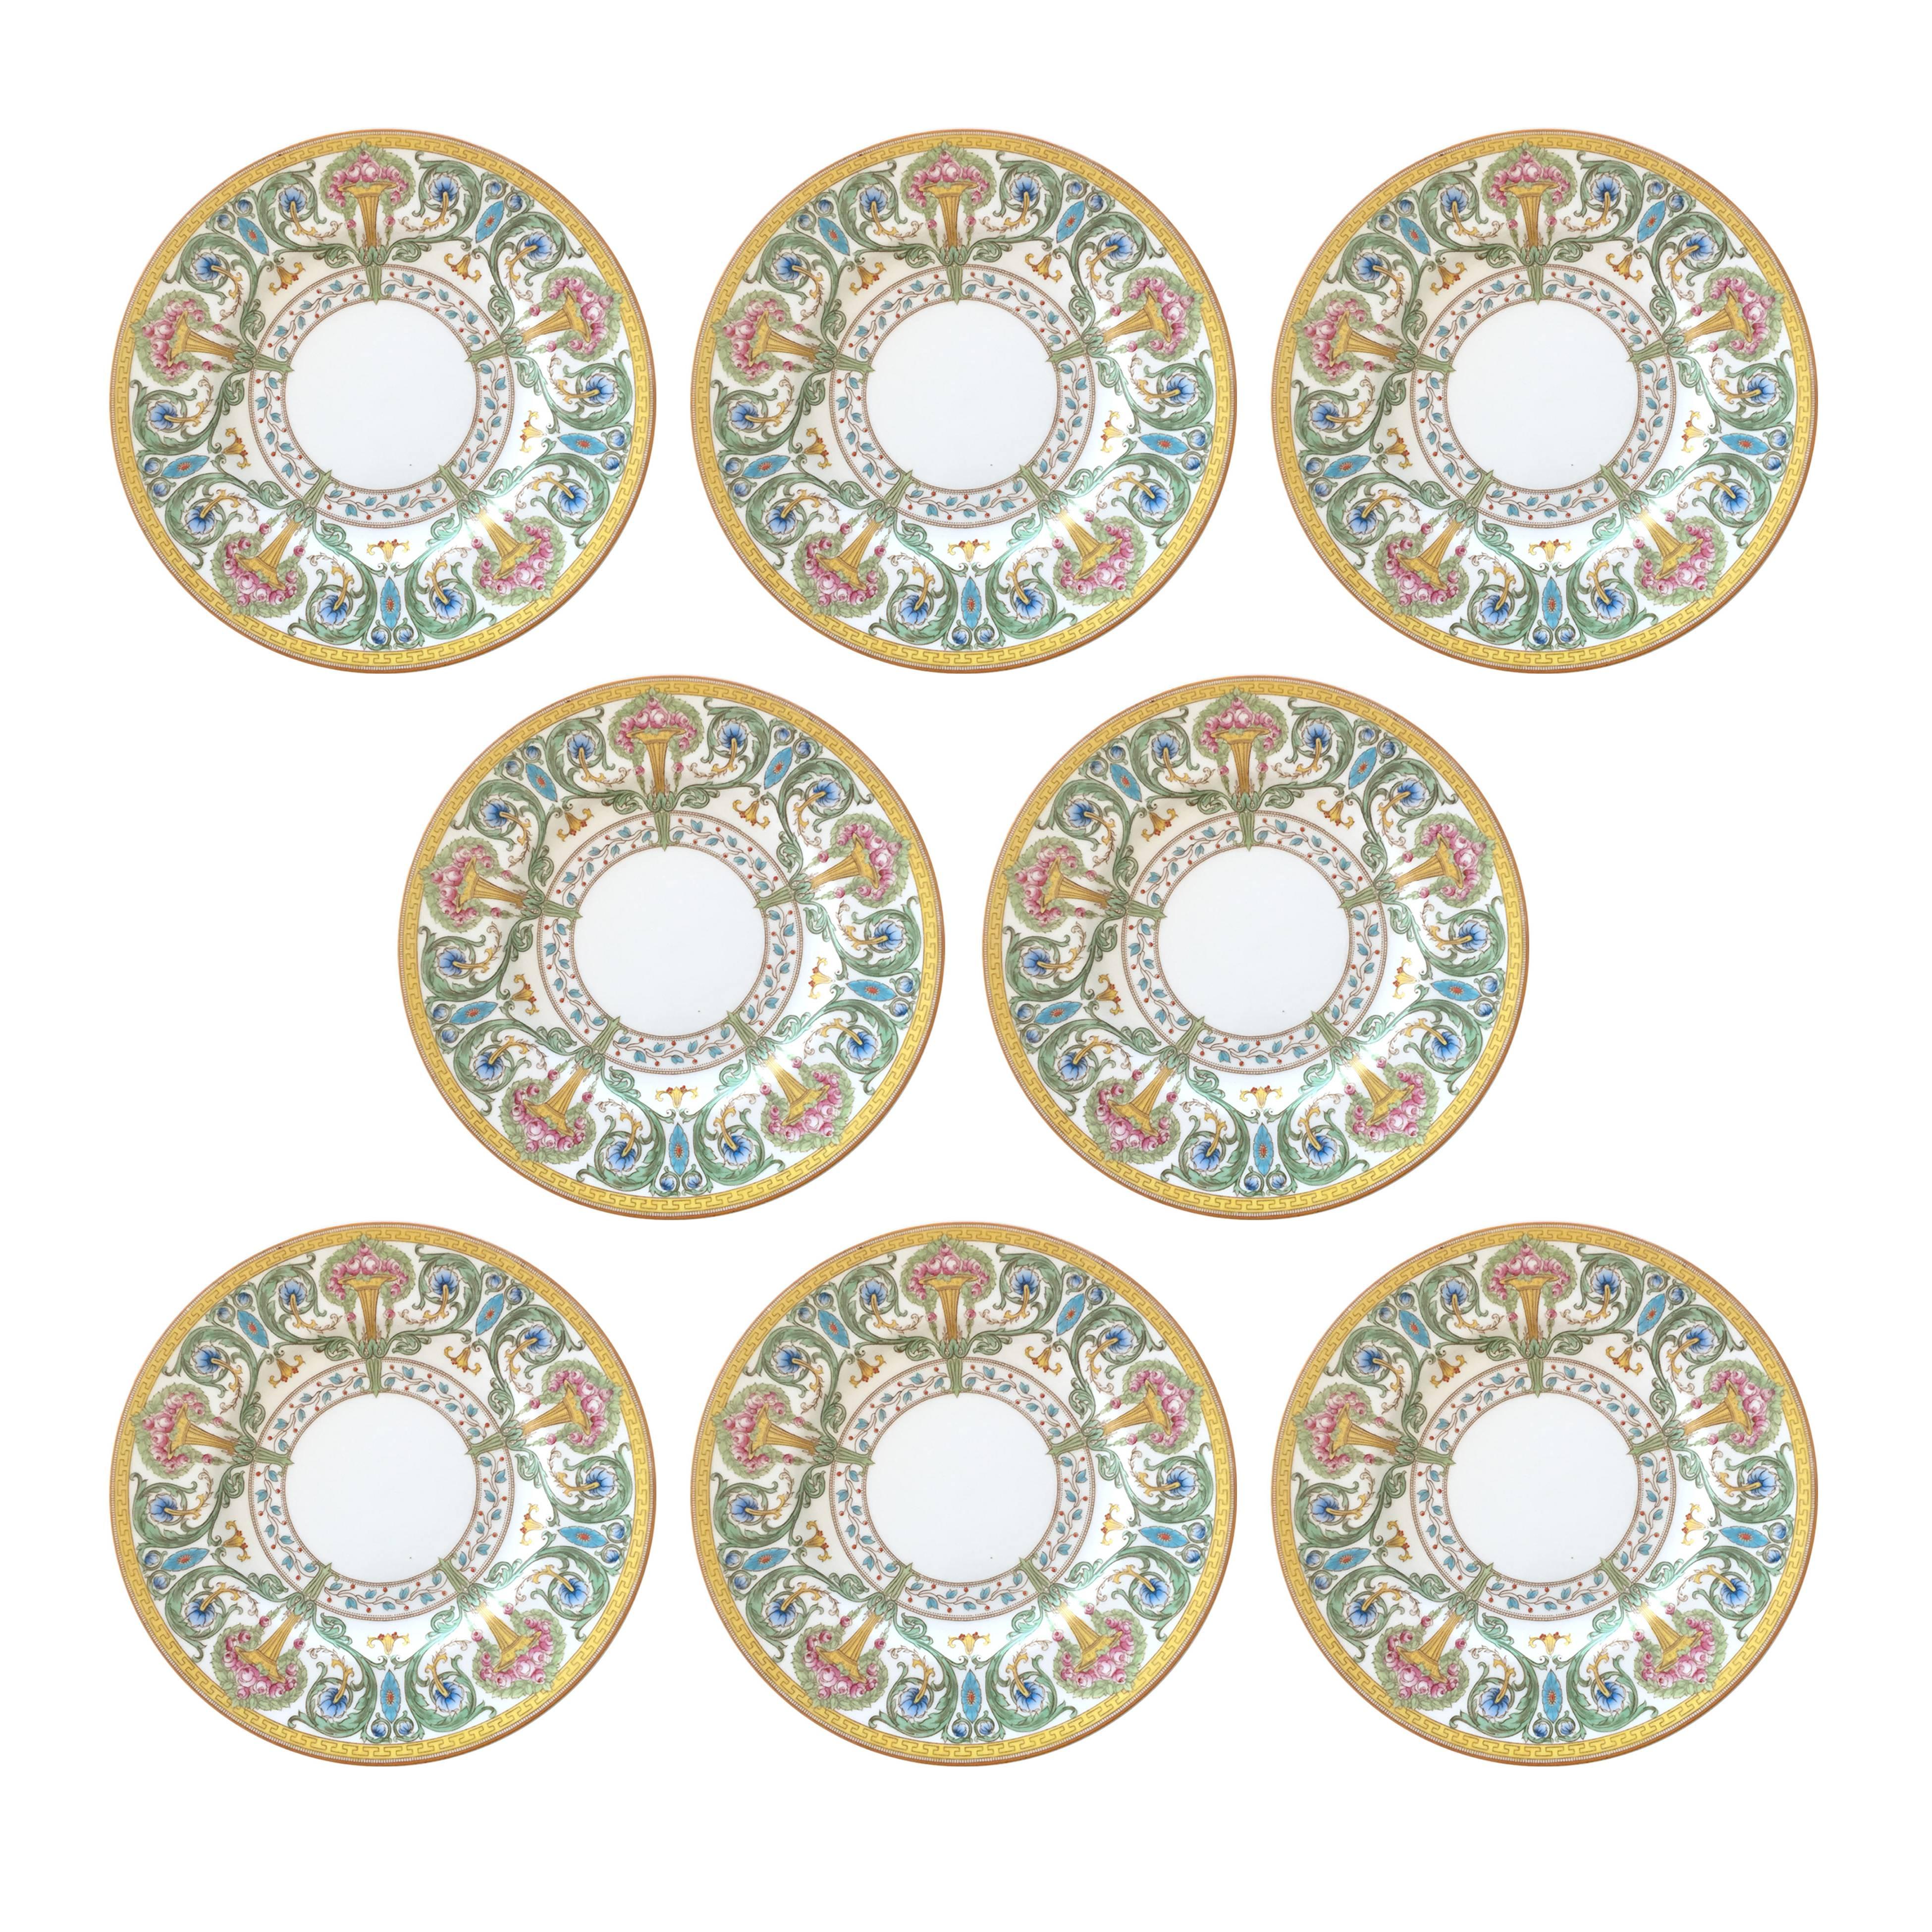 Set of Eight Royal Worcester Hand-Painted Plates